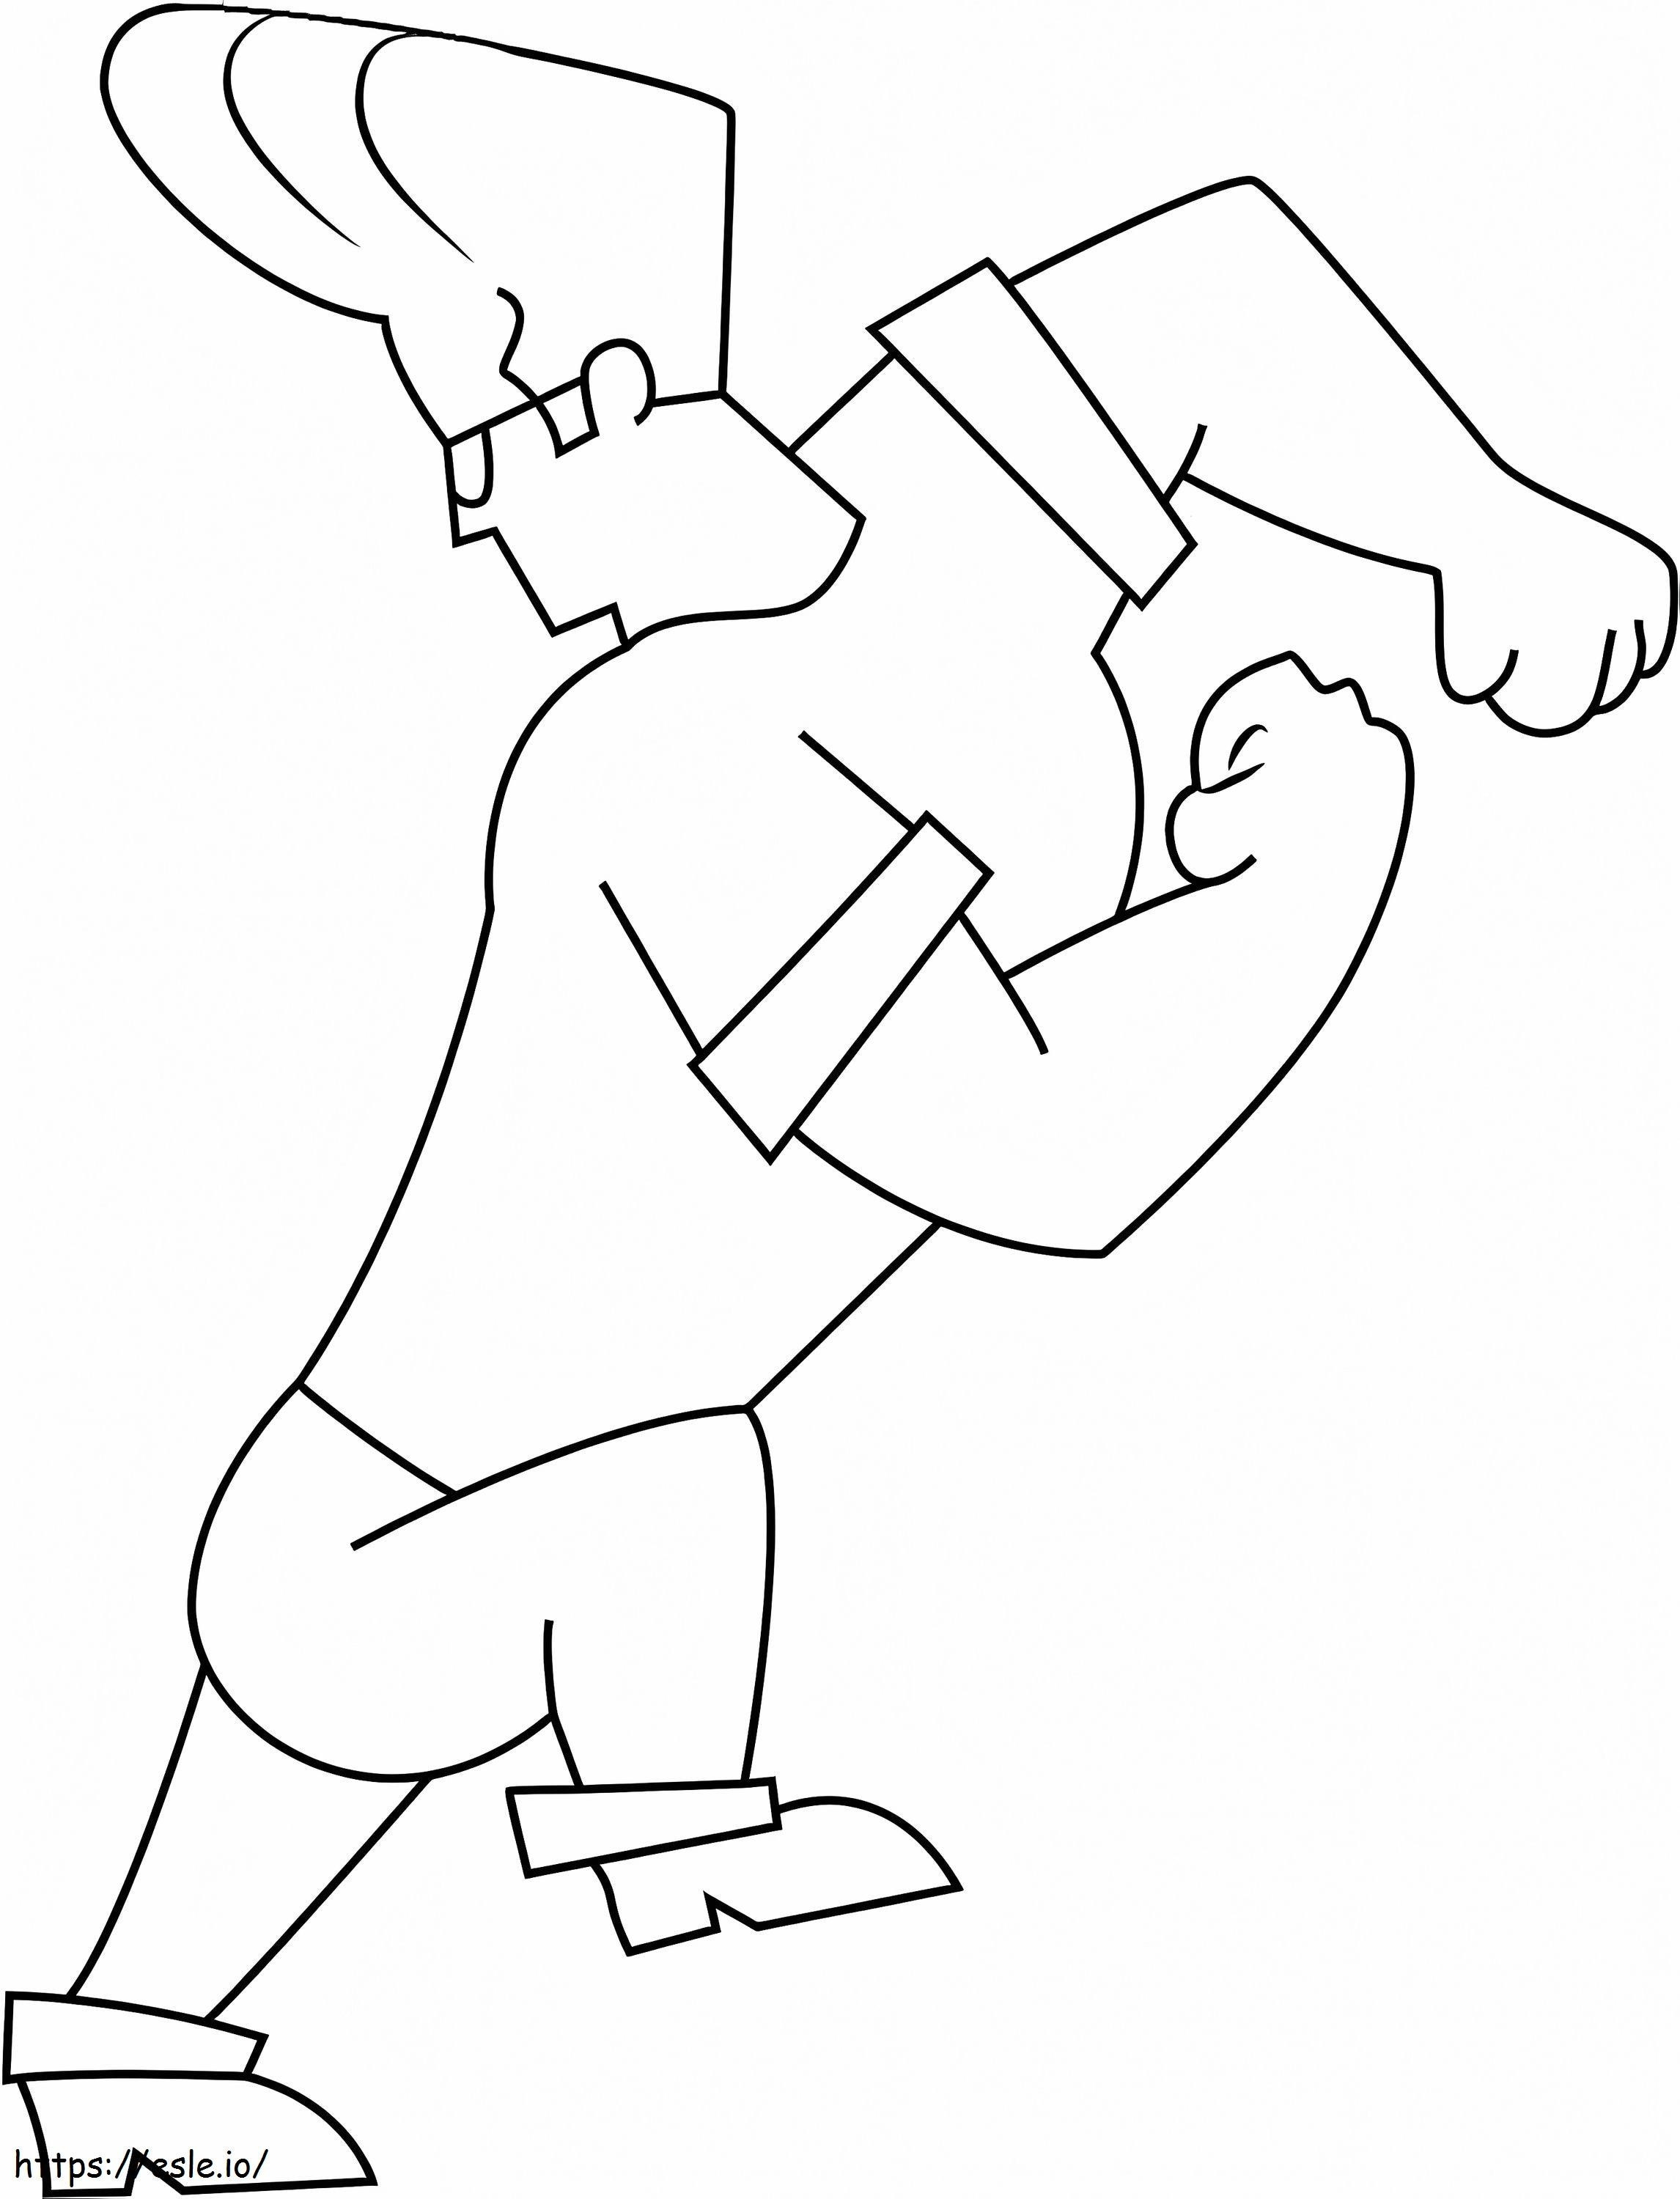 Cool Johnny Bravo coloring page